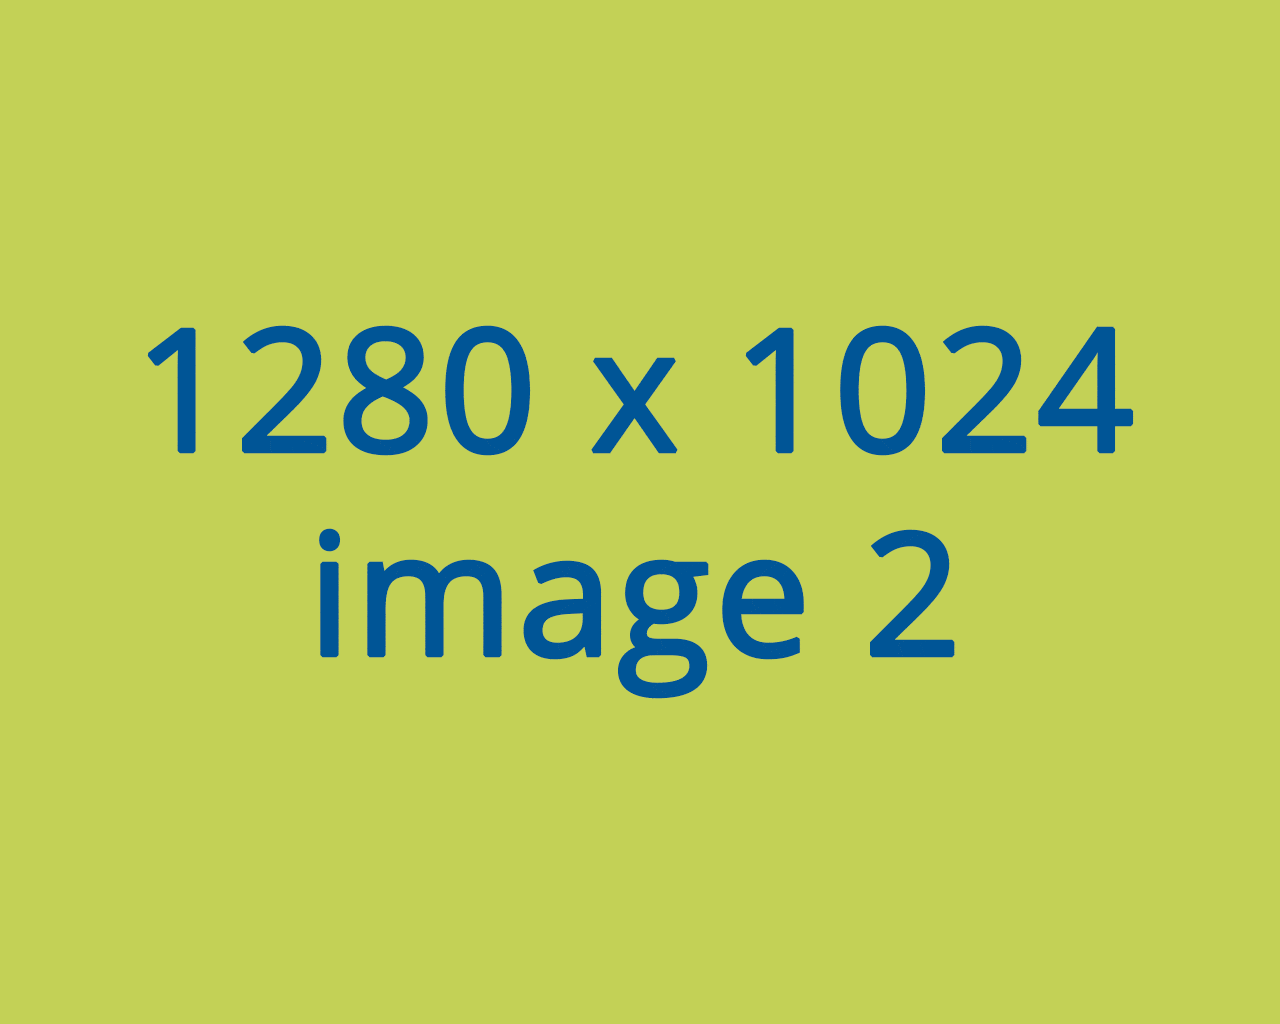 sample image 2, size 1280 by 960 pixels